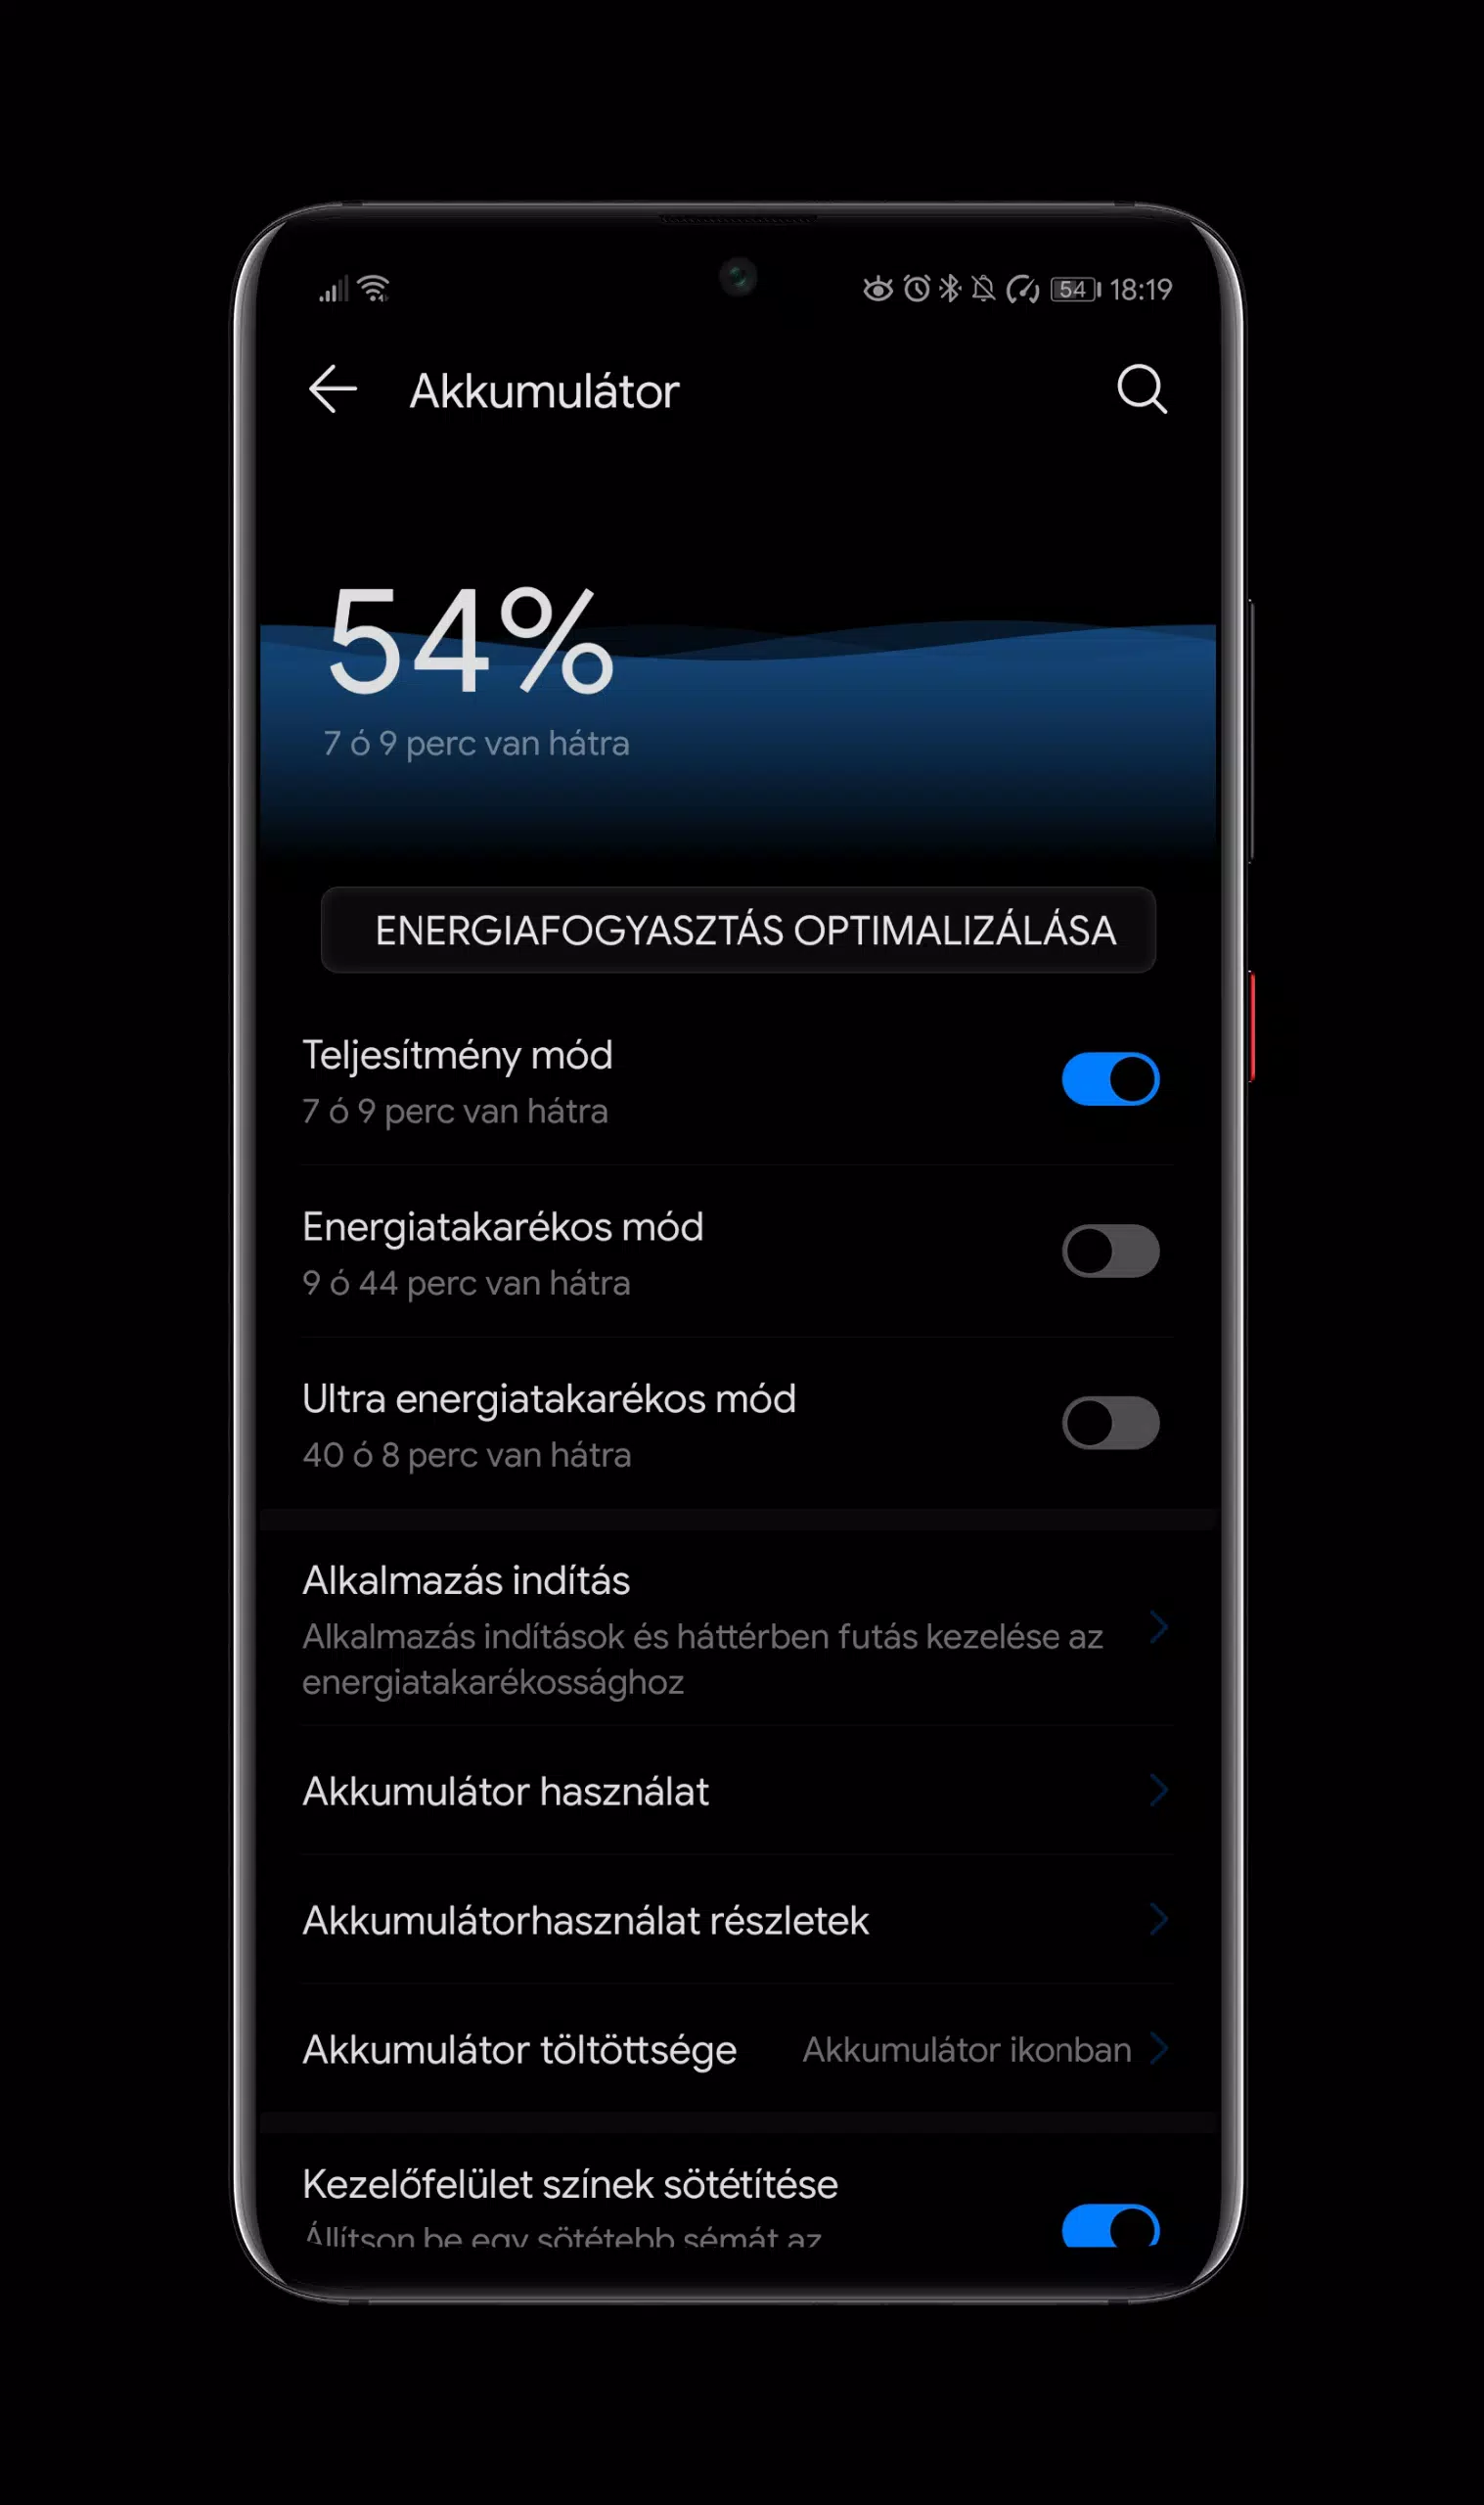 Black Pie Theme for EMUI 9 / 9 Latest Version 10.0.1 for Android